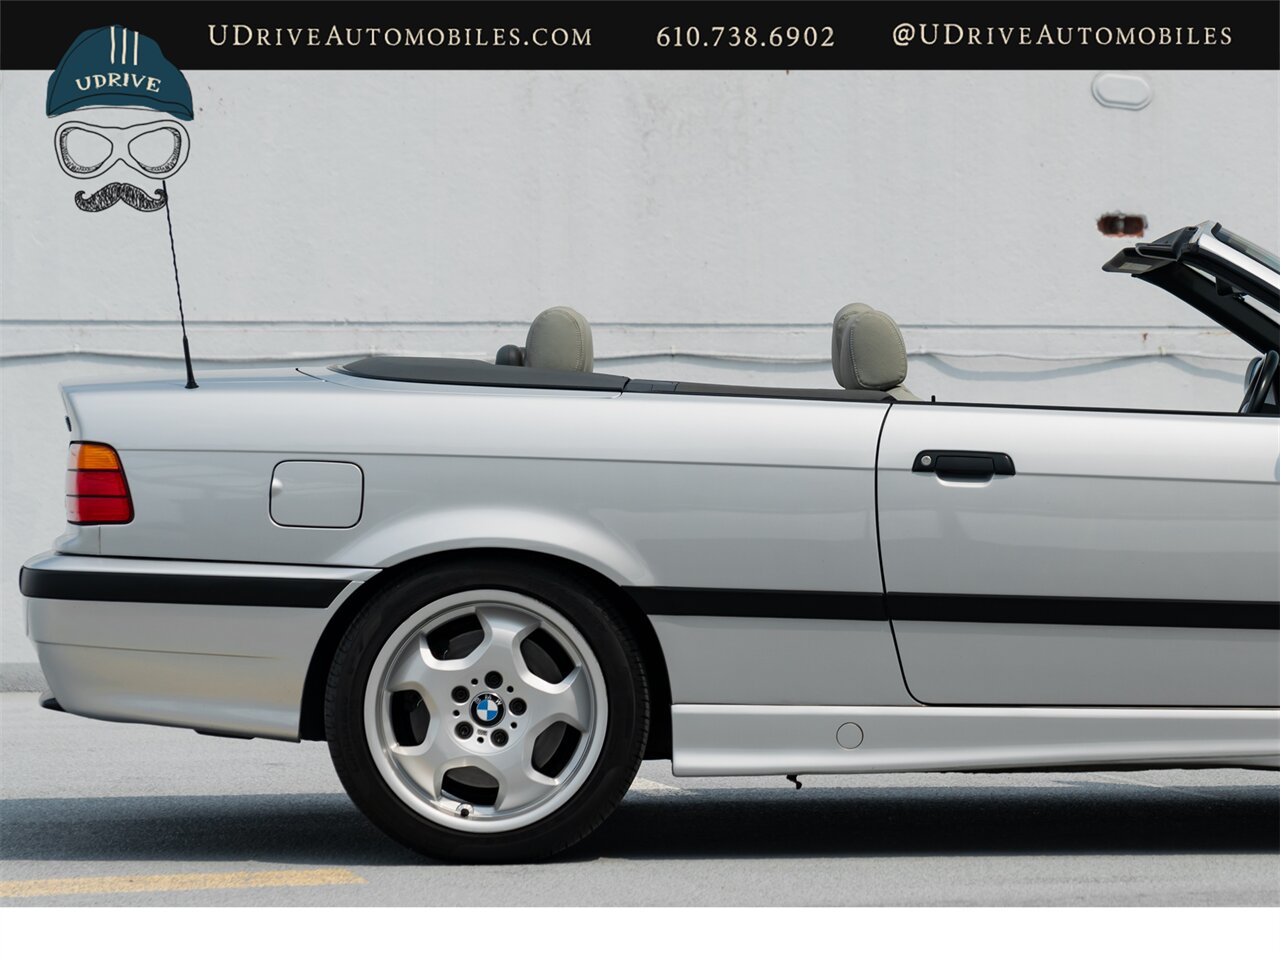 1998 BMW M3 Convertible  Automatic $7k Recent Service Low Miles - Photo 18 - West Chester, PA 19382